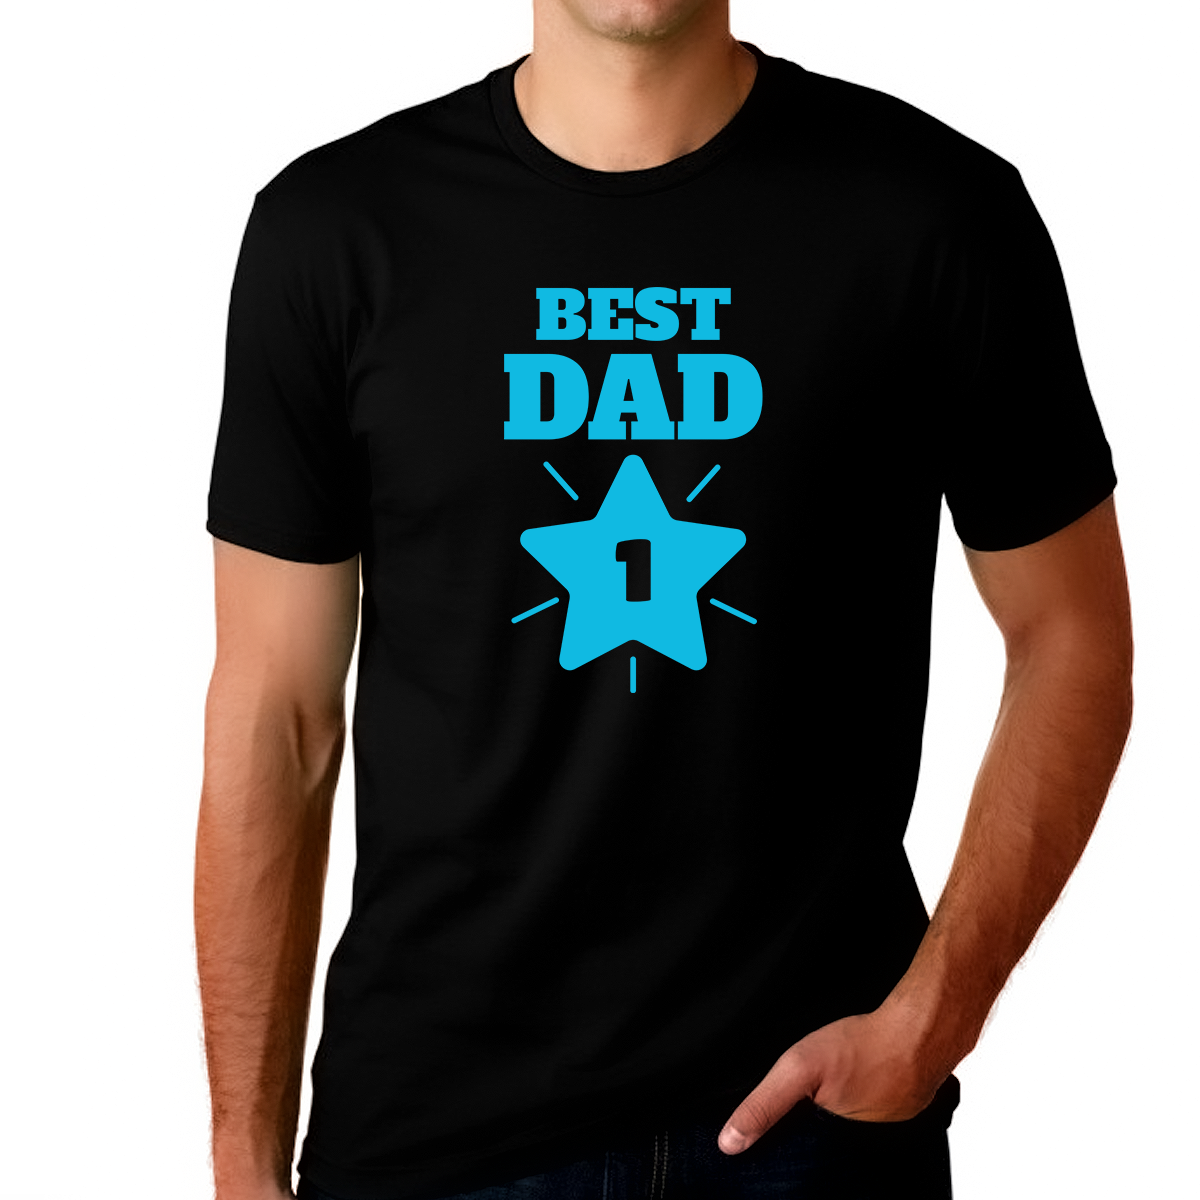 Daddy Shirt #1 Girl Dad Shirt for Men Dad Shirts Fathers Day Shirt Fathers Day Gifts from Daughter